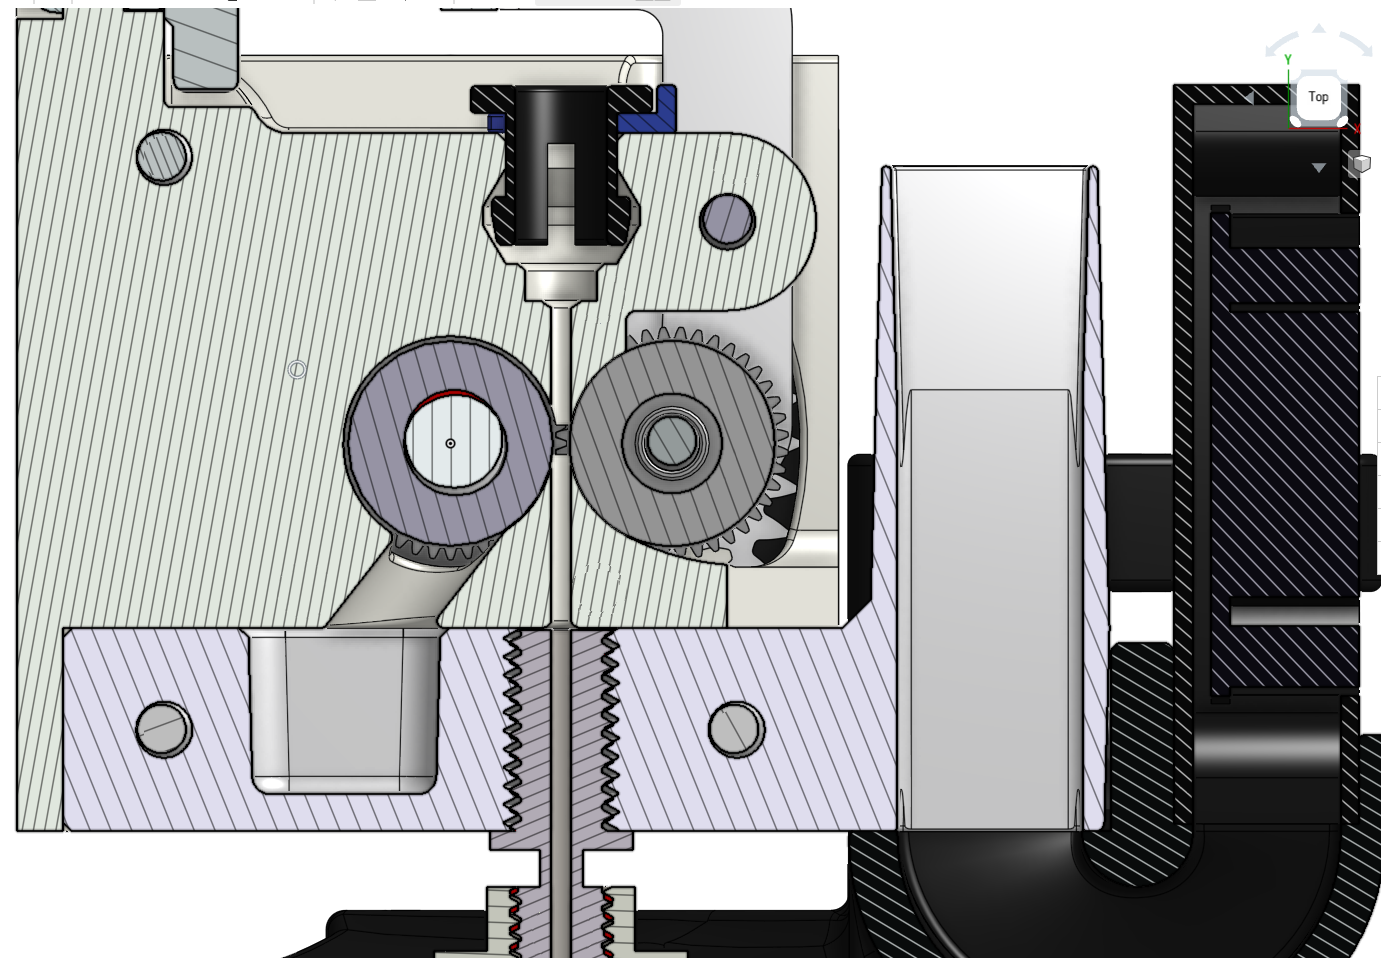 A cross section view showing the filament extrusion path through the OmniaDrop Extruder.